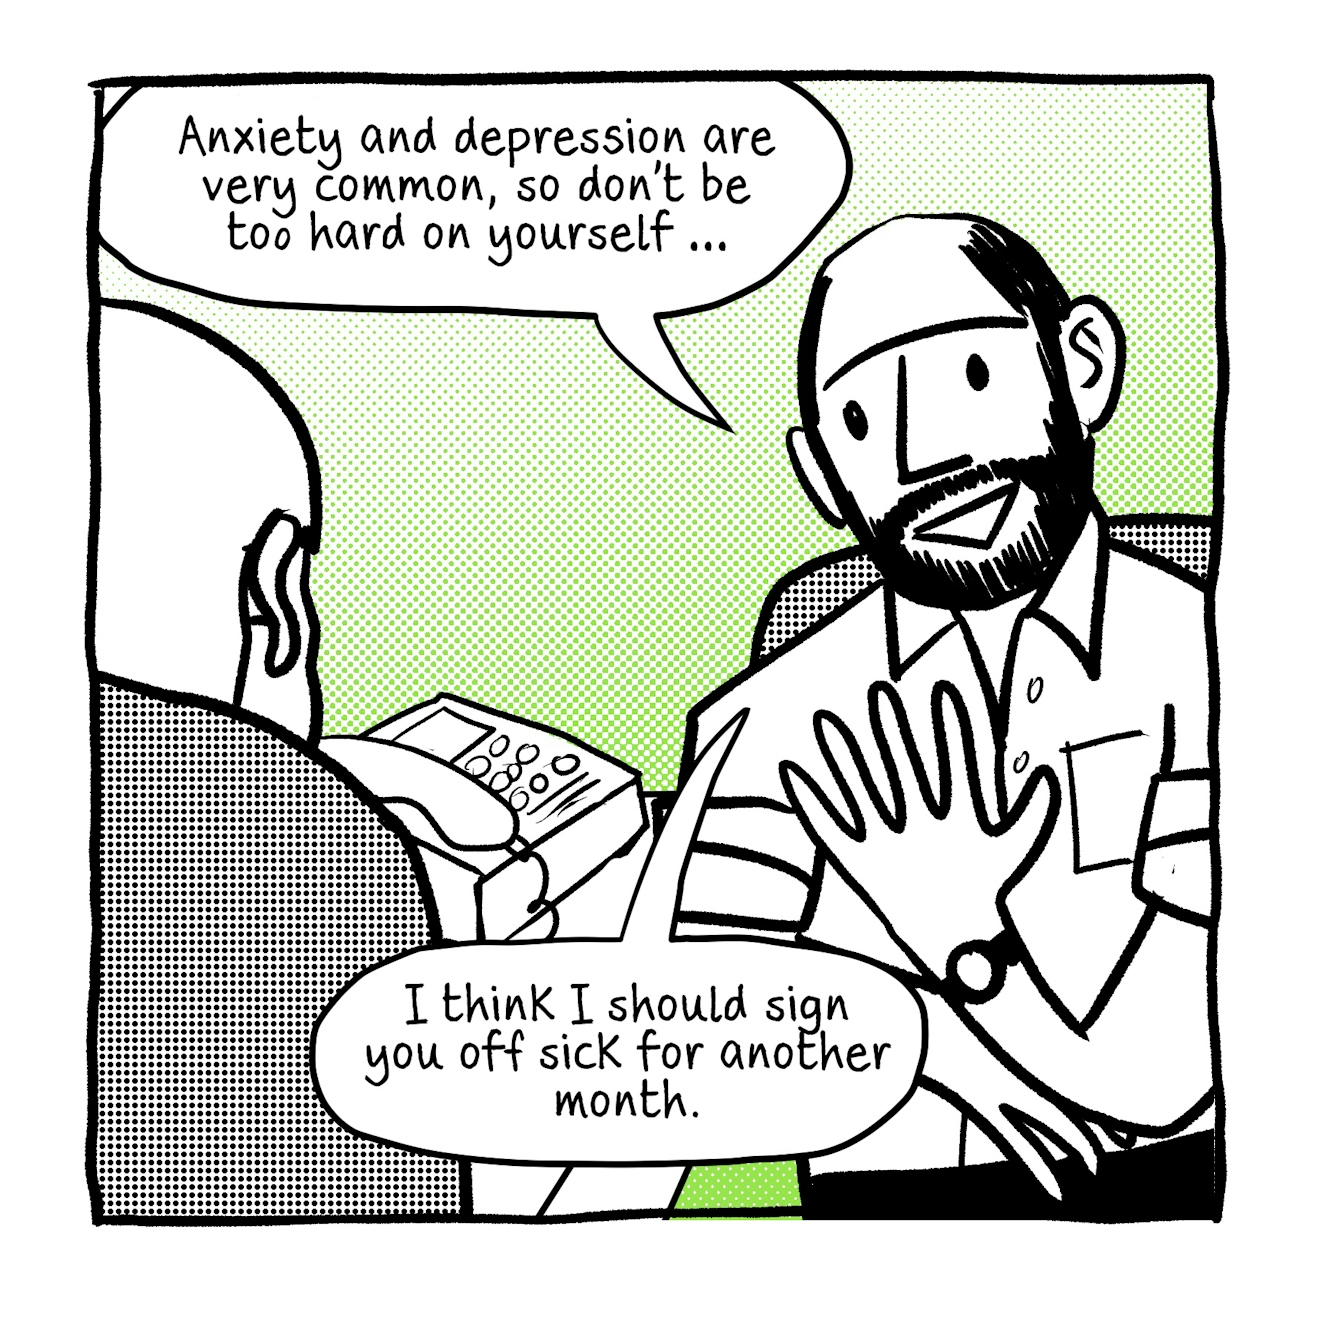 A four panel comic in black and white with a bright green accent tone. 

The first panel shows a young male GP with a beard sitting at his consulting desk next to his desk phone. Across the desk is his patient. The GP is saying "Anxiety and depression are very common, so don't be too hard on yourself... I think I should sign you off for another month."